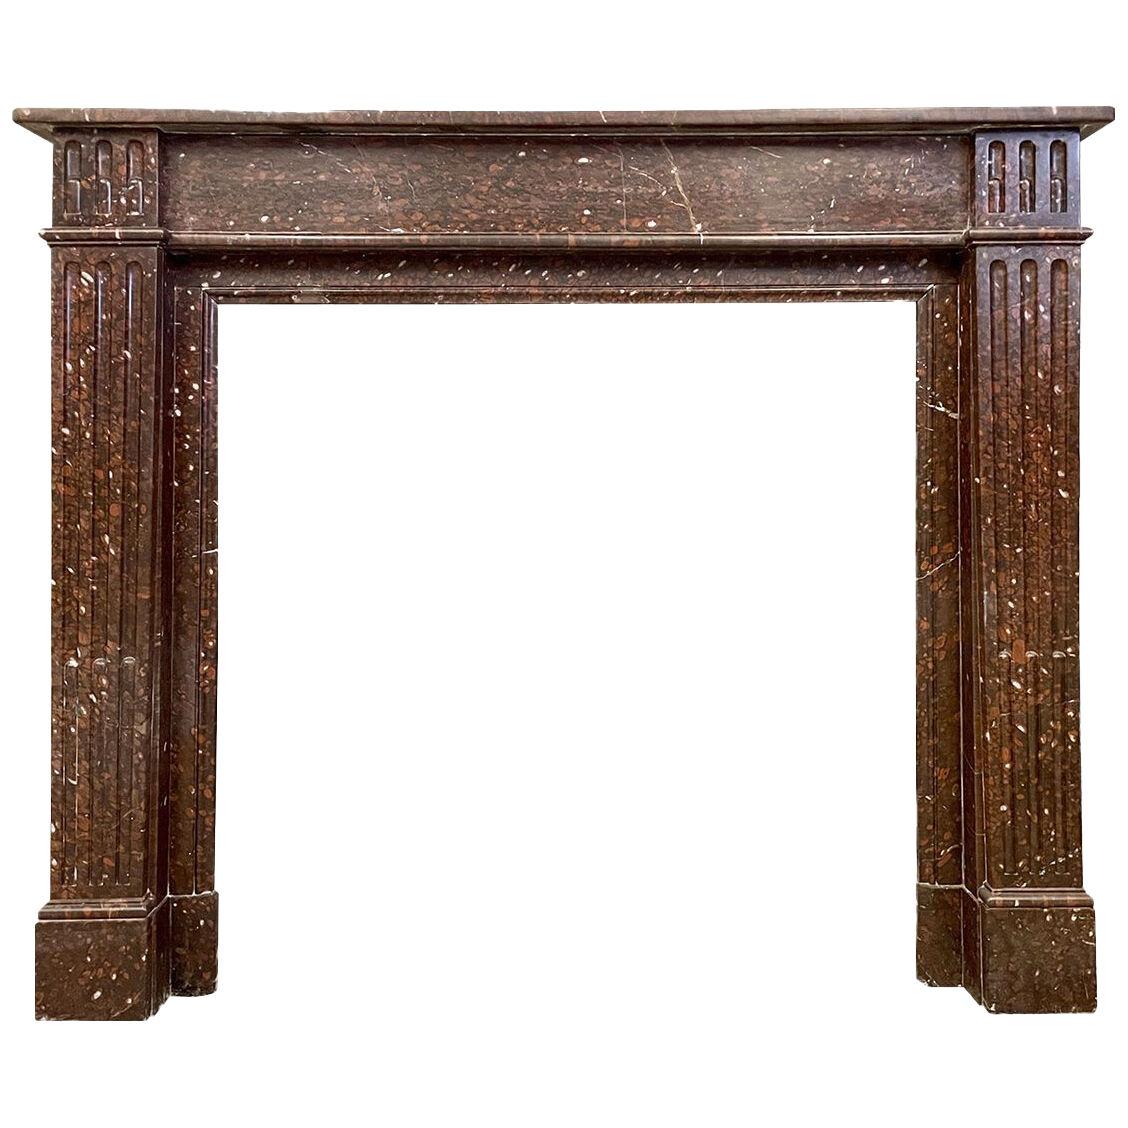 An Antique French Louis XVI Style Fireplace Mantel